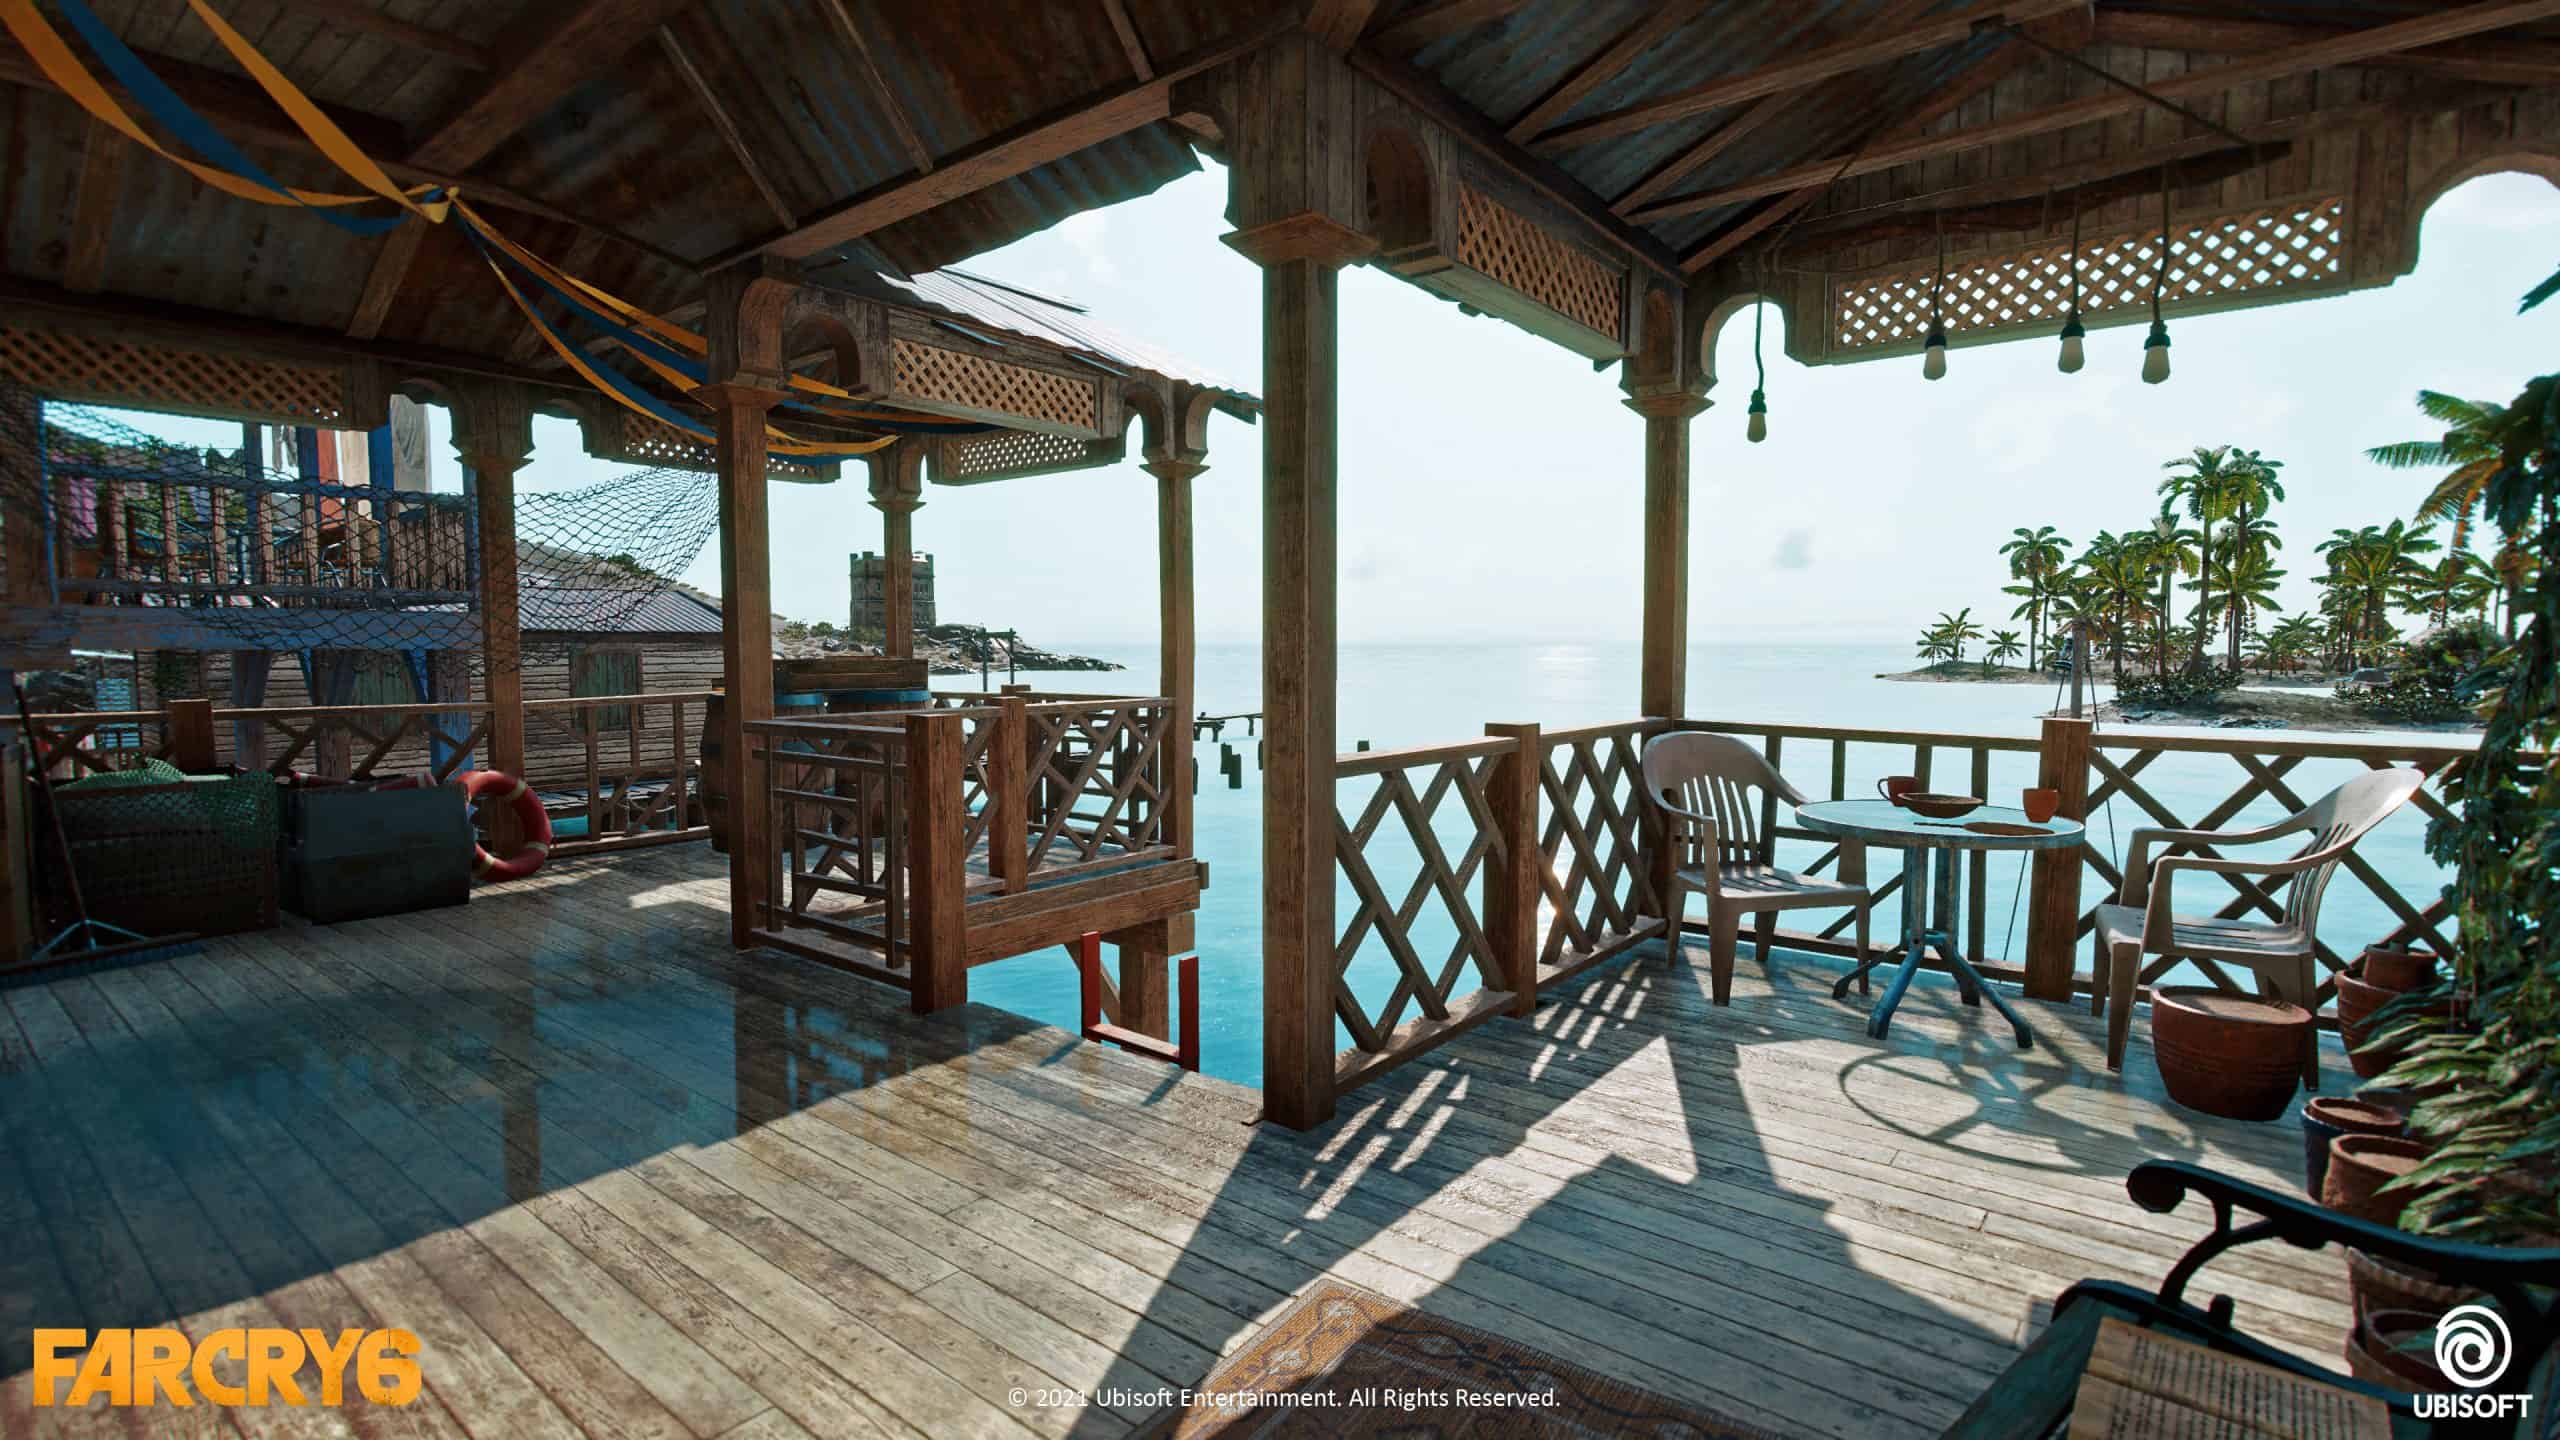 Far Cry 6 art, house on stilts over water